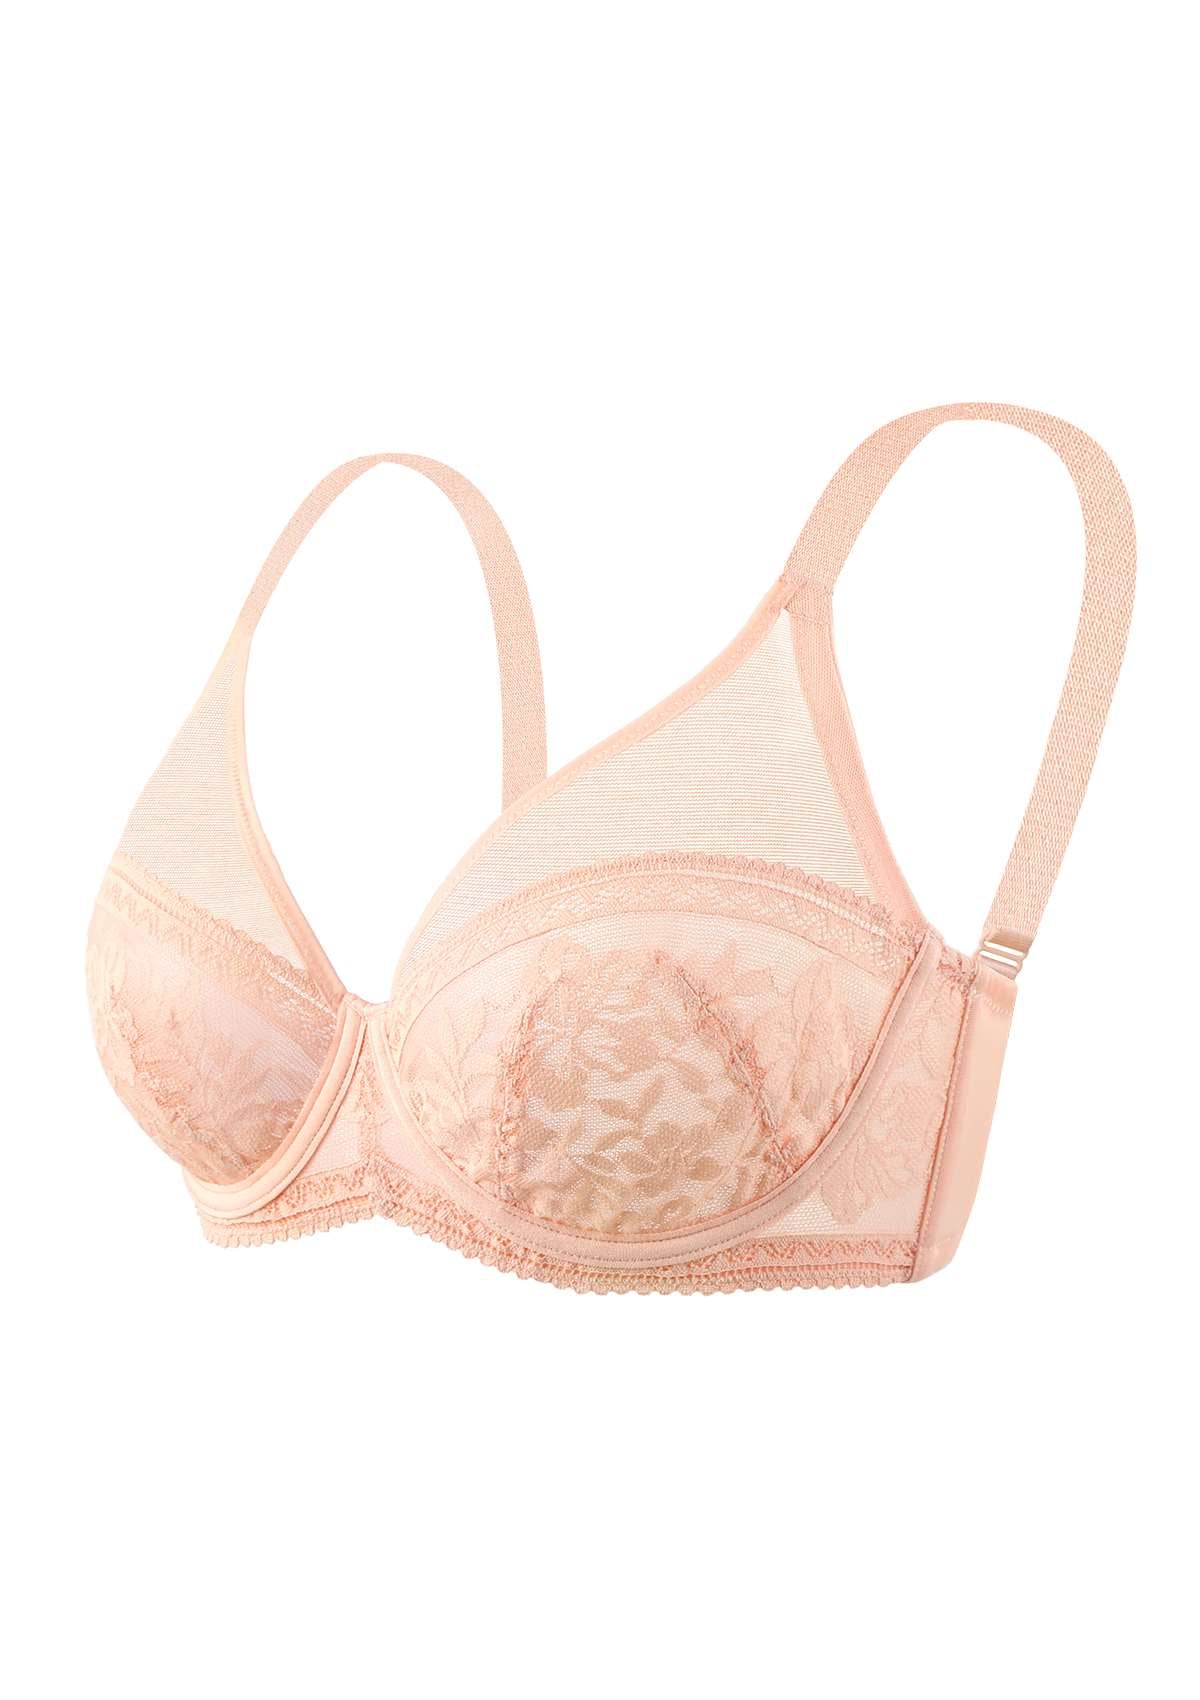 HSIA Gladioli Lace Mesh Minimizing Unlined Underwire Bra For Fuller Busts - Peach / 44 / G